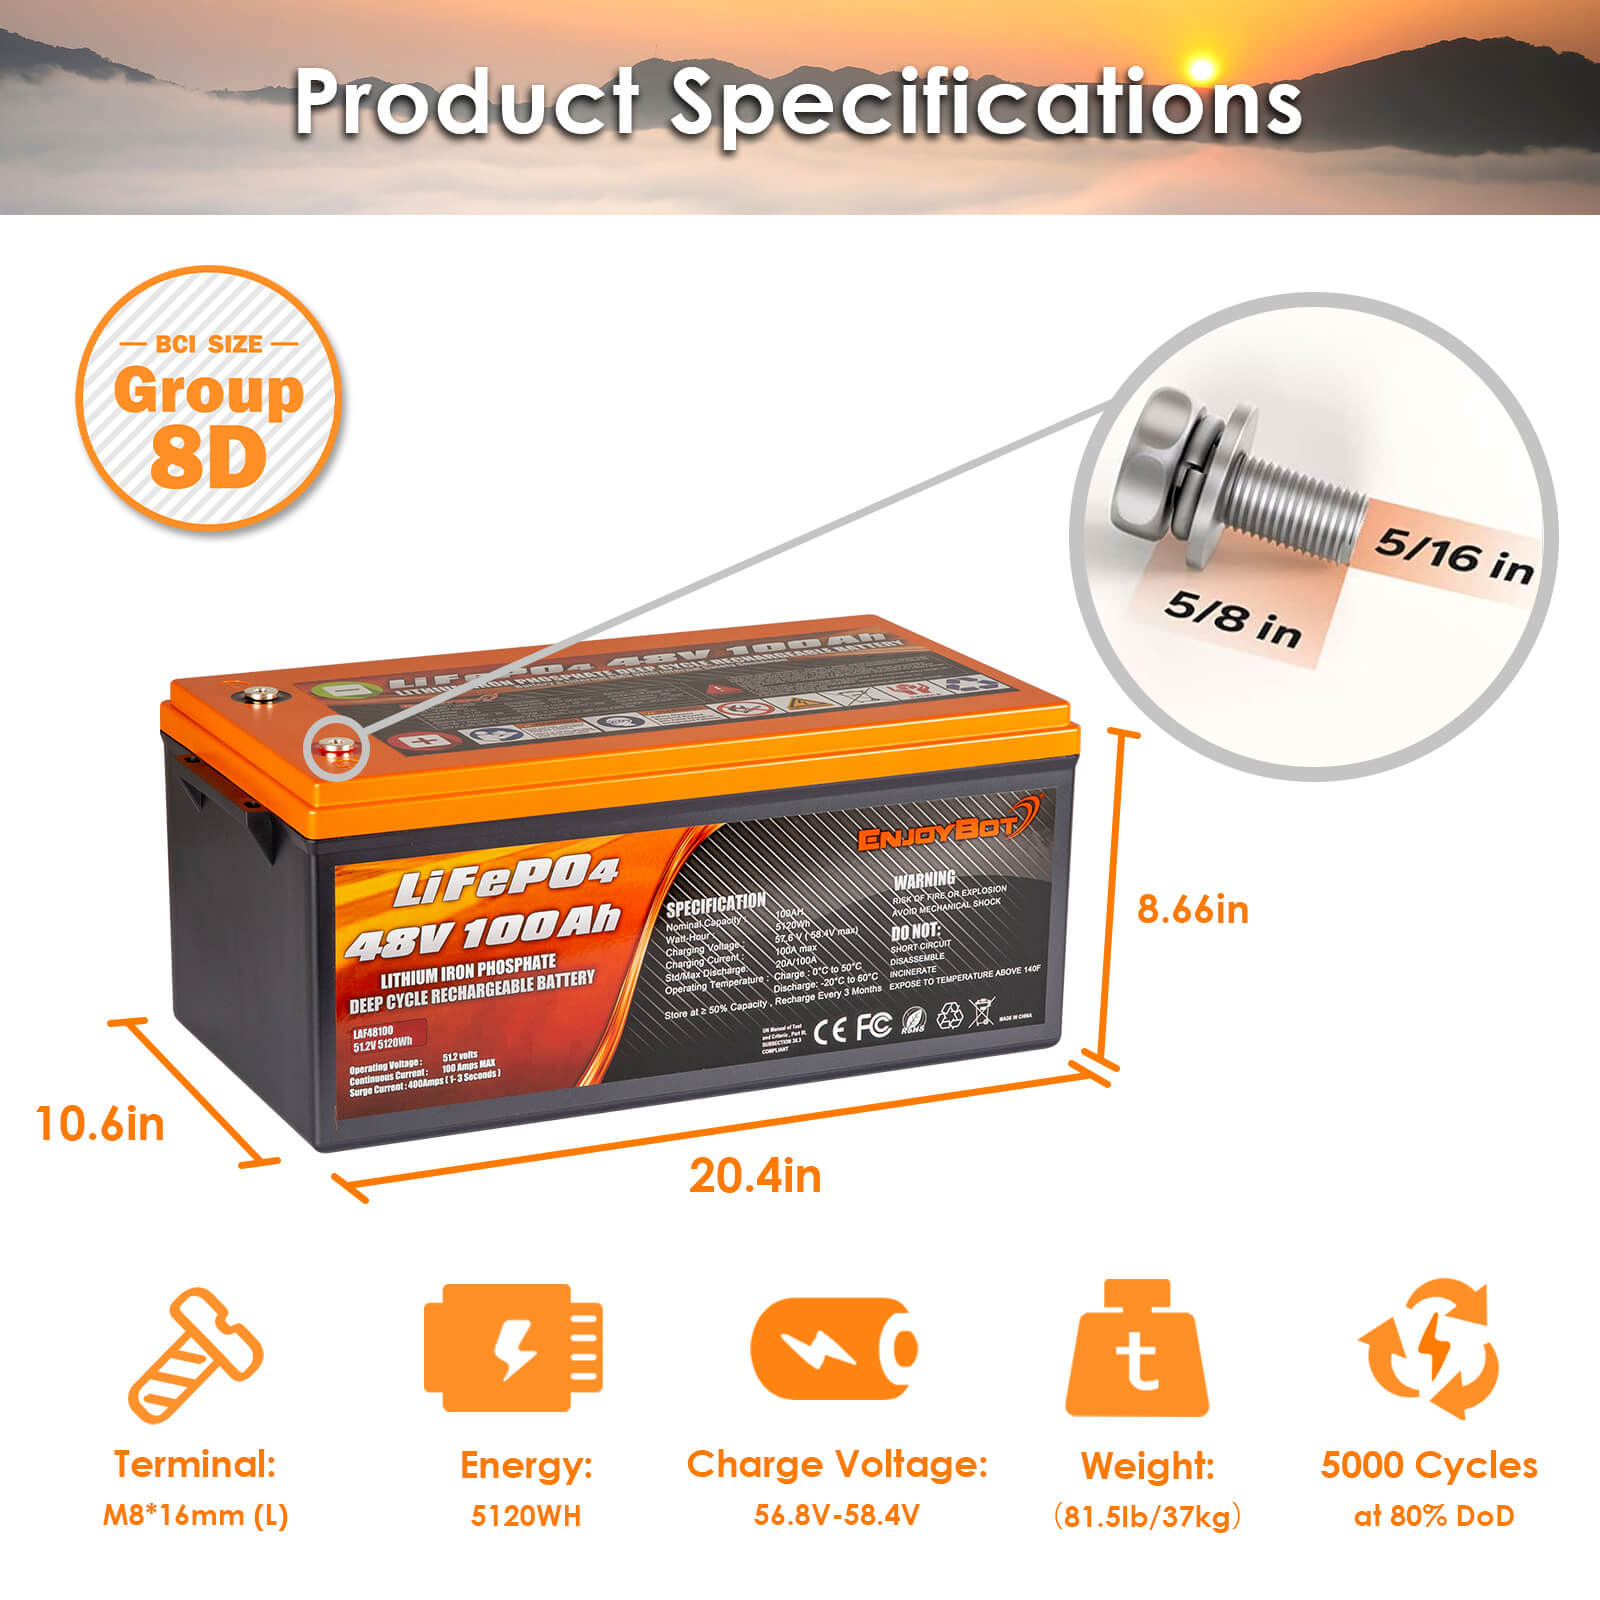 Buy High-Quality Rechargeable LiFePO4 Batteries with Bluetooth